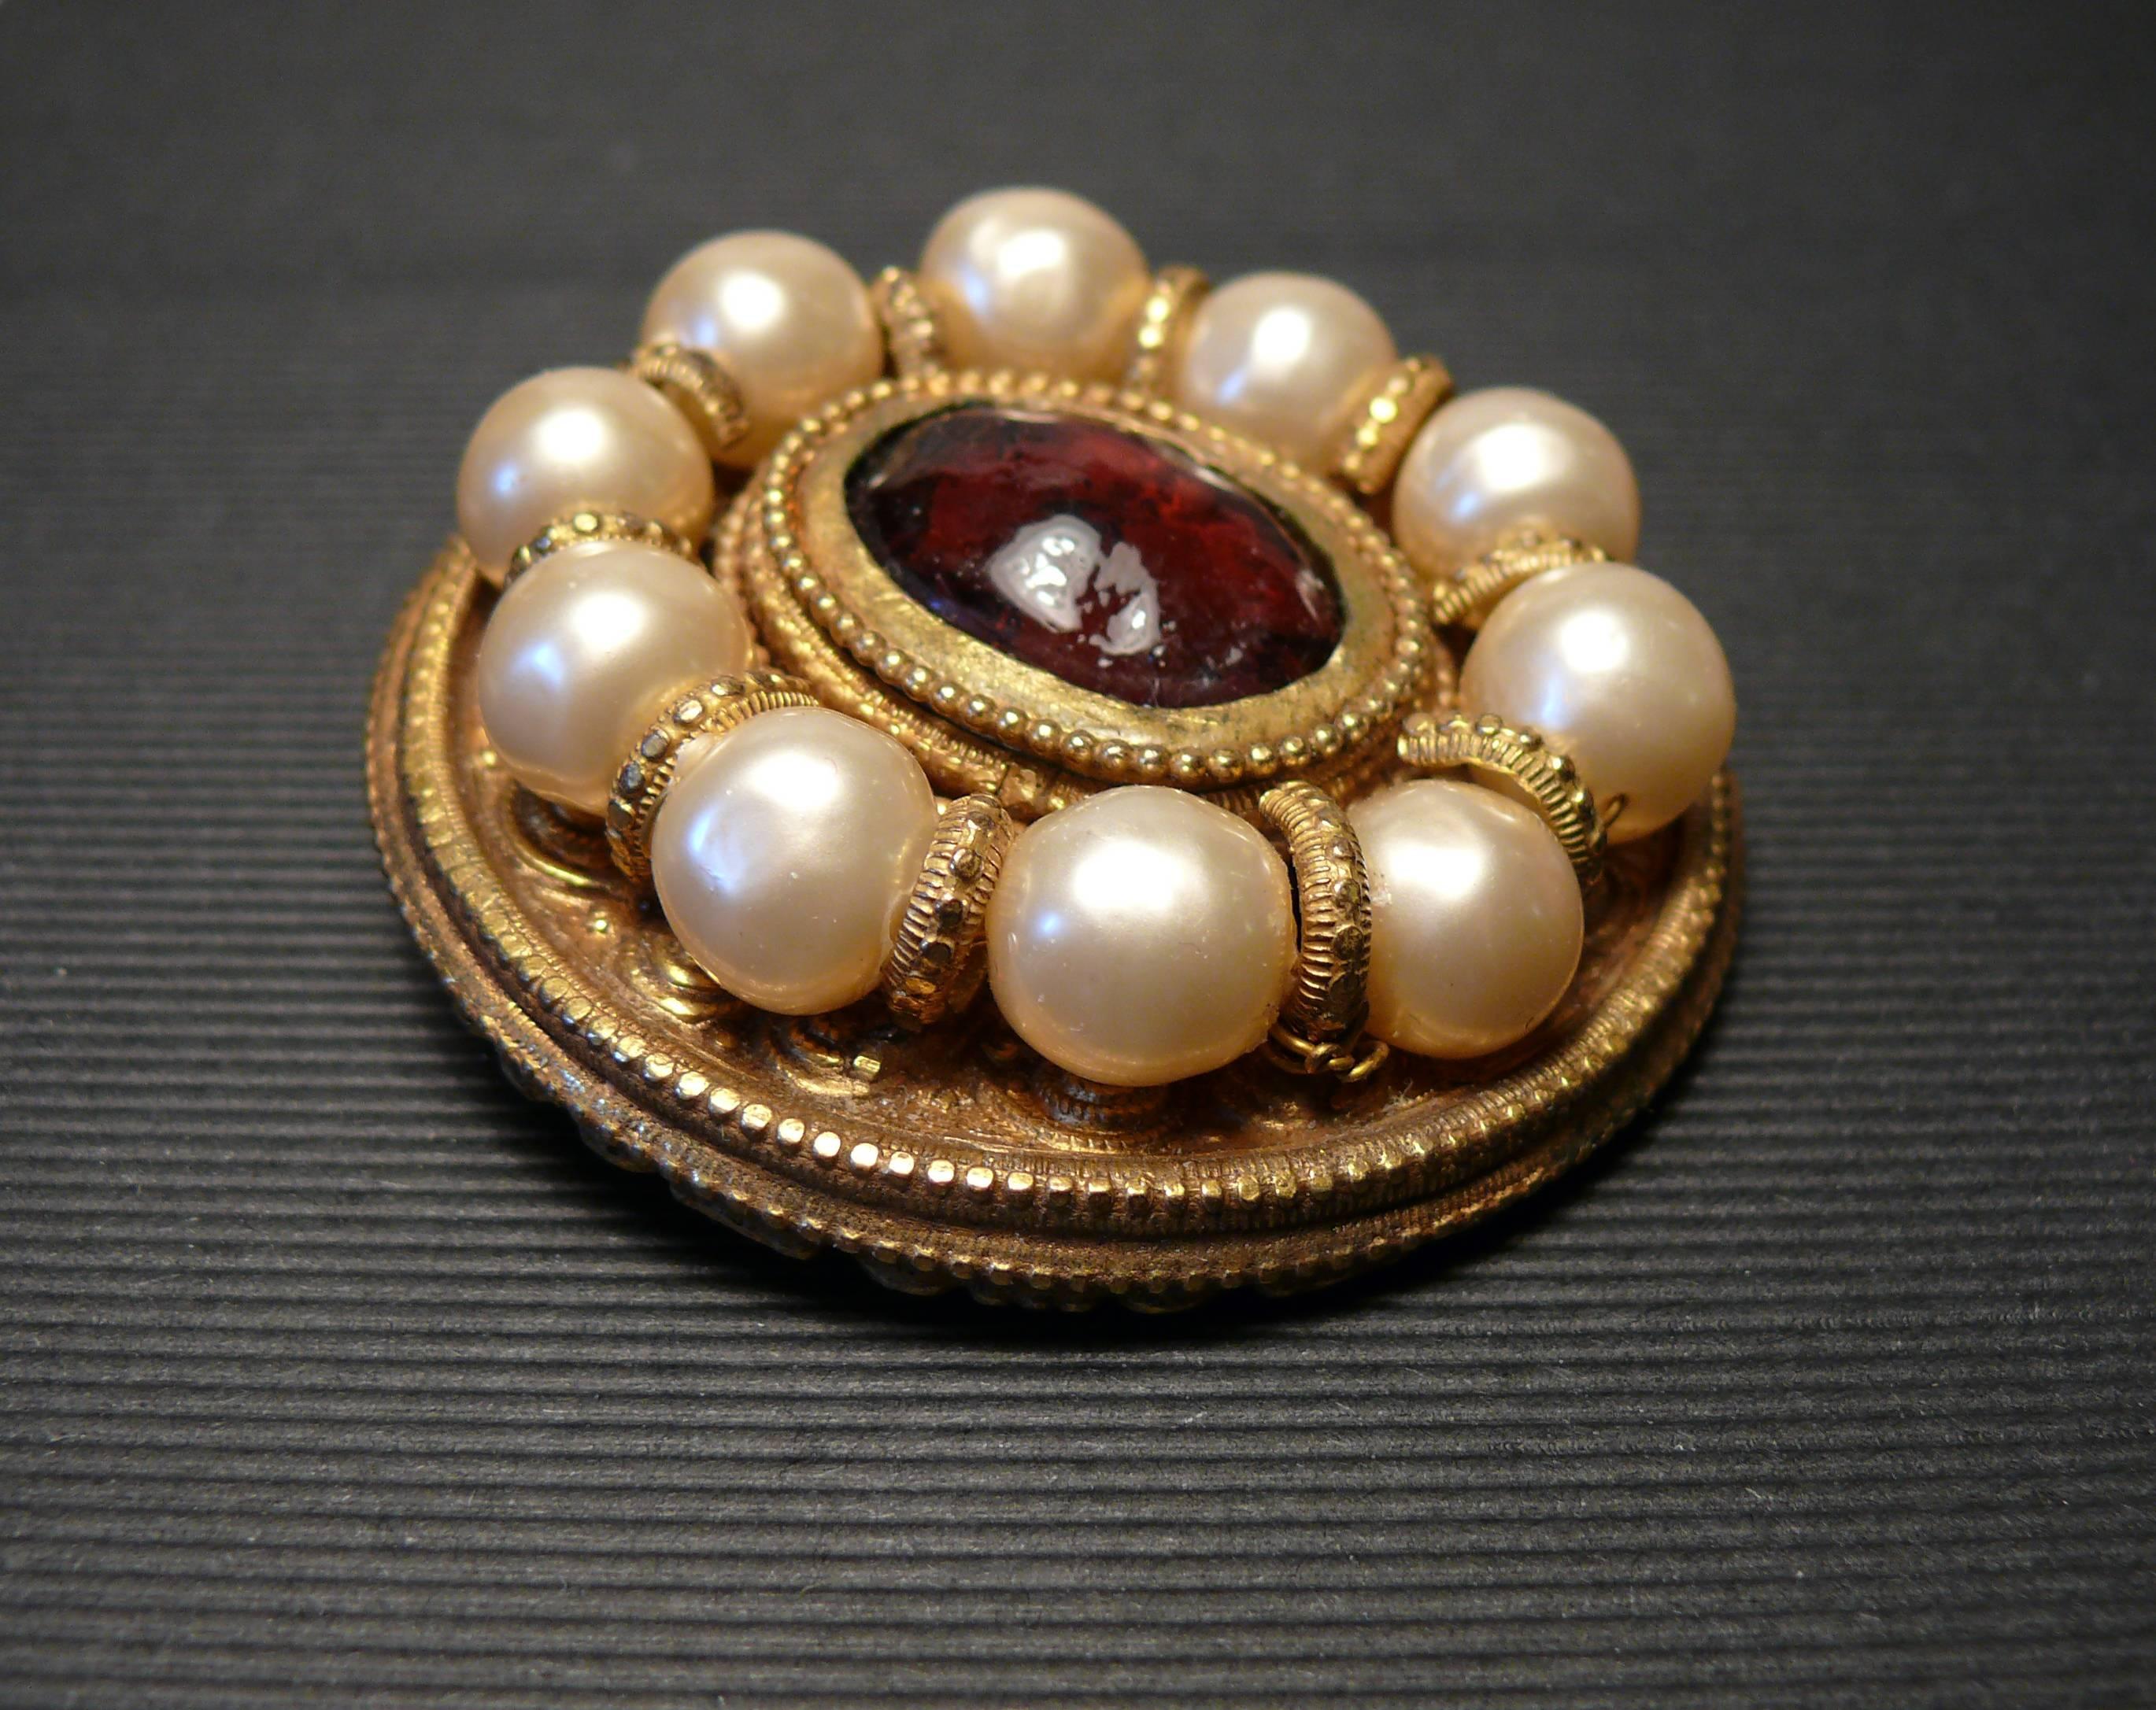 CHANEL vintage Baroque brooch featuring faux pearls and red-purple GRIPOIX pate de verre cabochon in a gold toned with antique patina setting.

Marked CHANEL Made in France.

Indicative measurements : diameter approx. 5 cm (1.97 inches).

JEWELRY